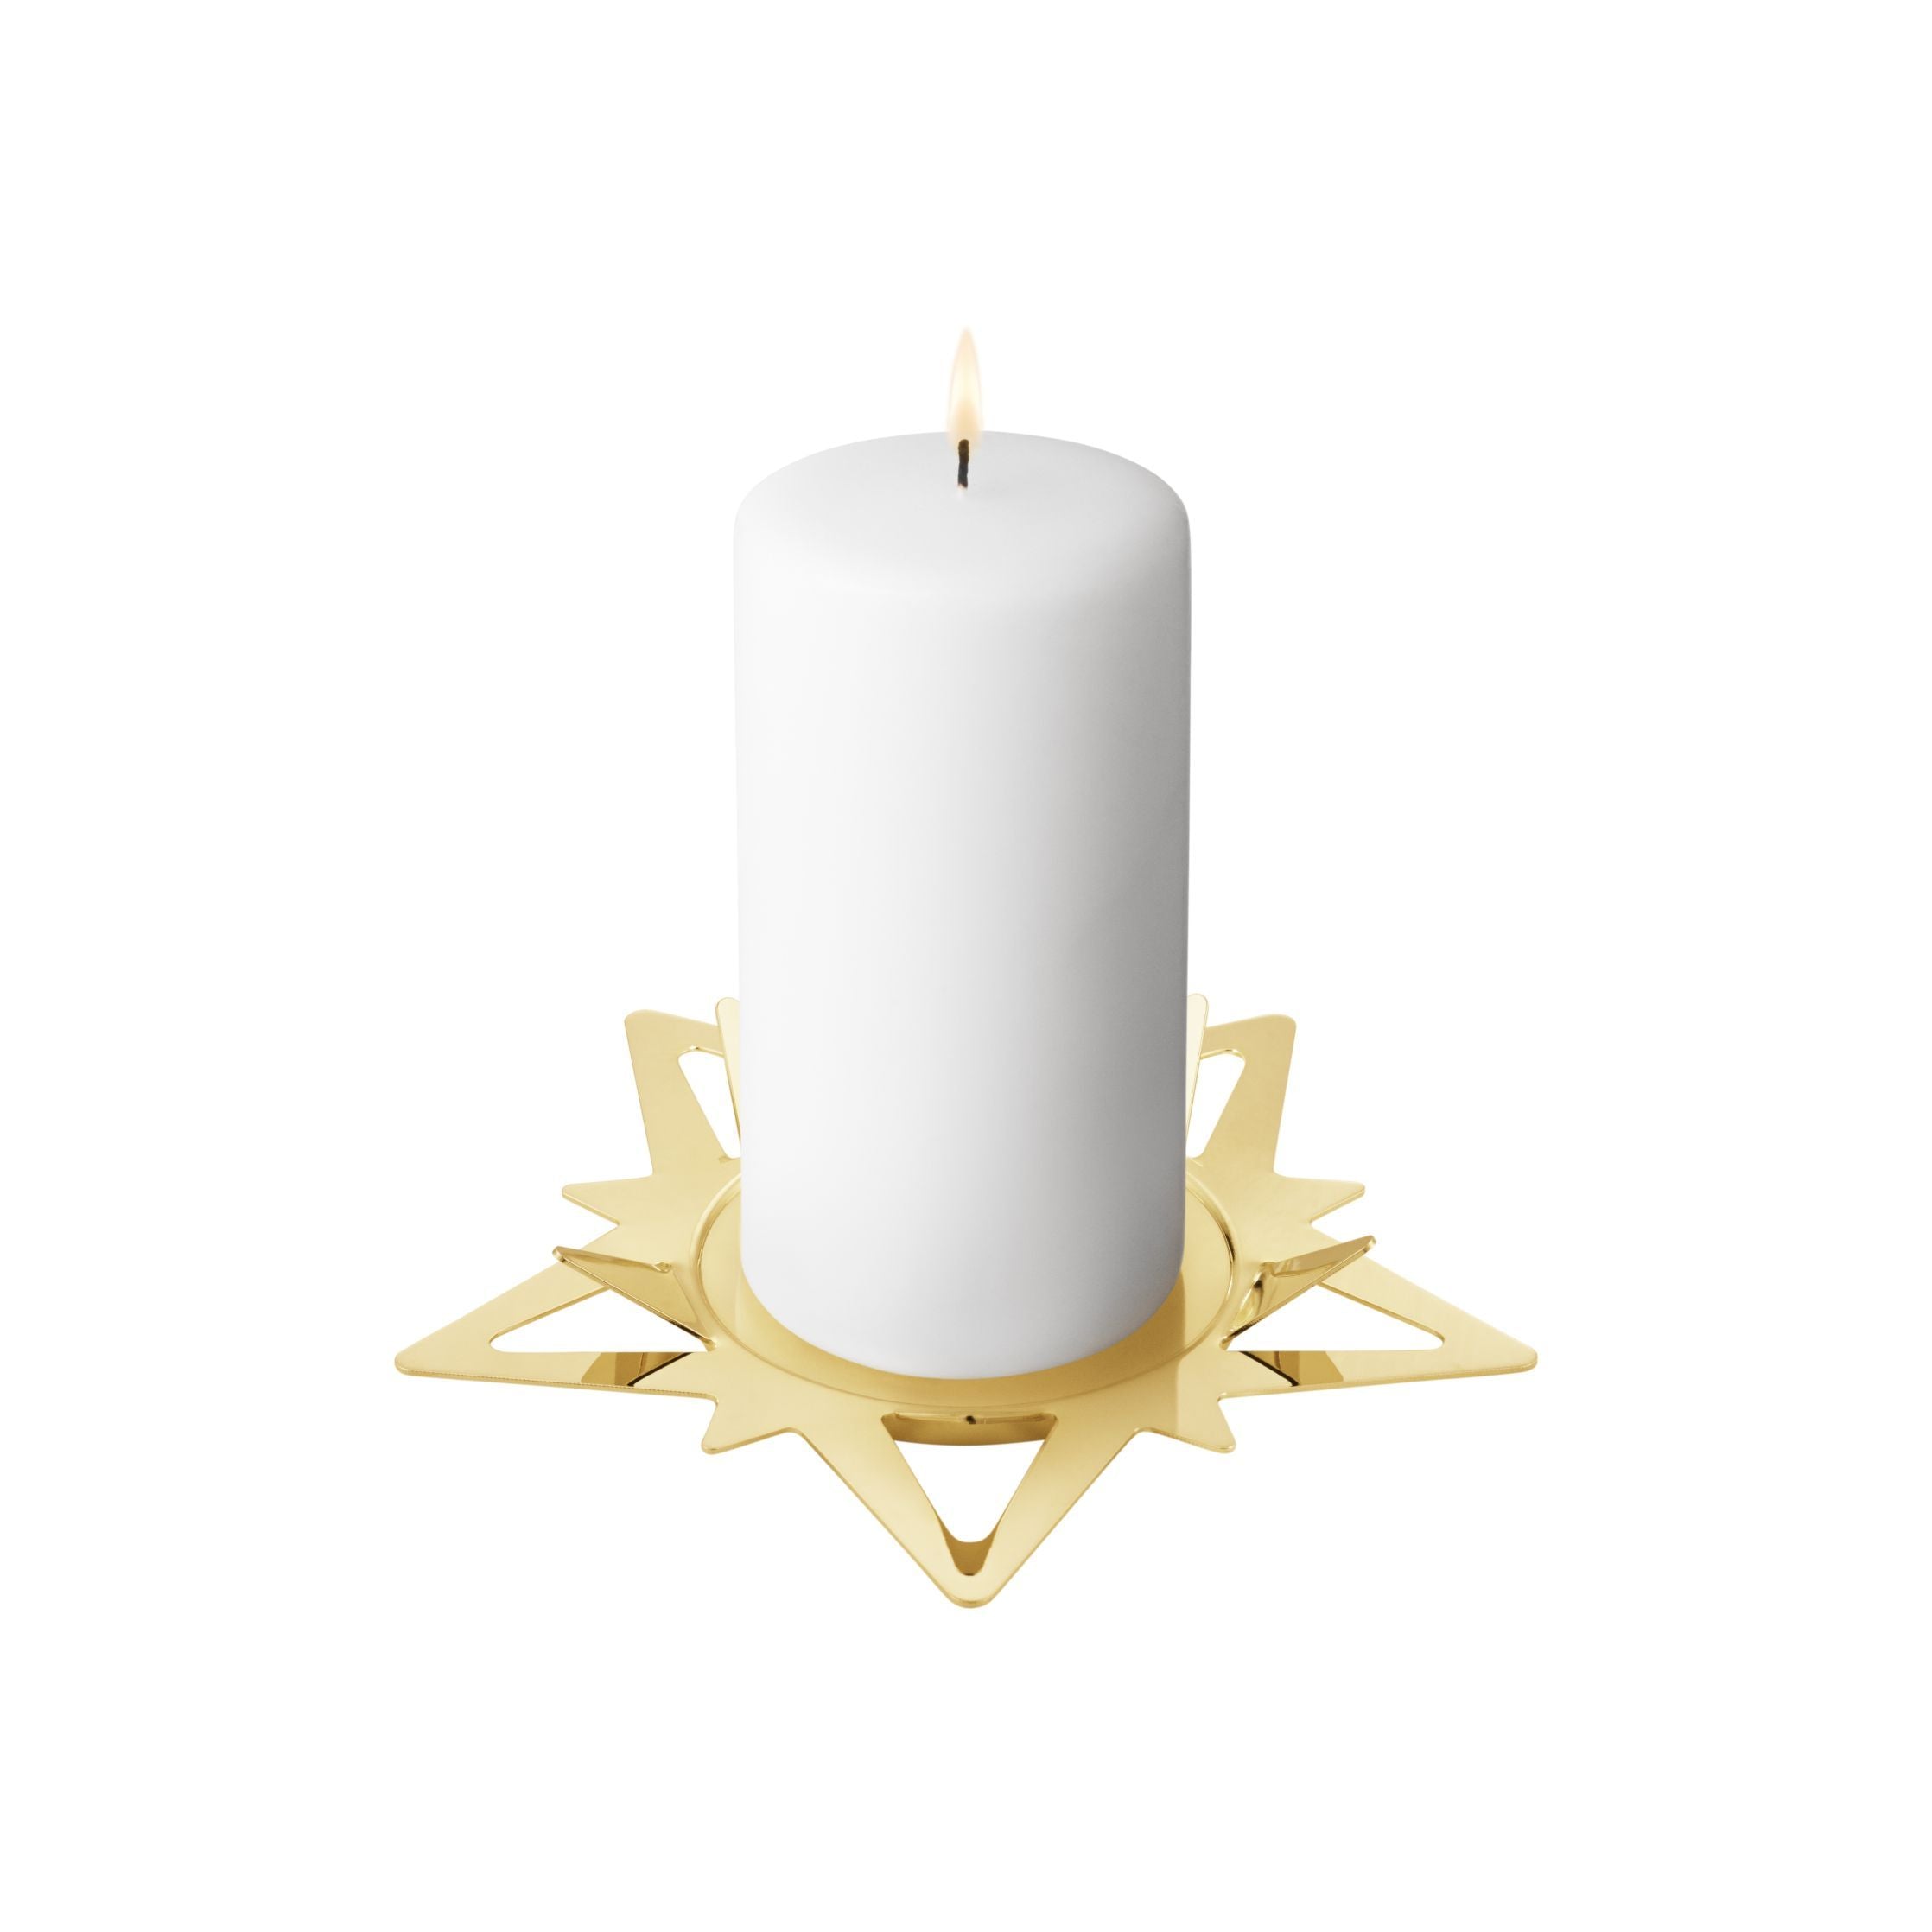 Georg Jensen Classic Christman Star Star Candle Candle Holder for Block Candles，镀金